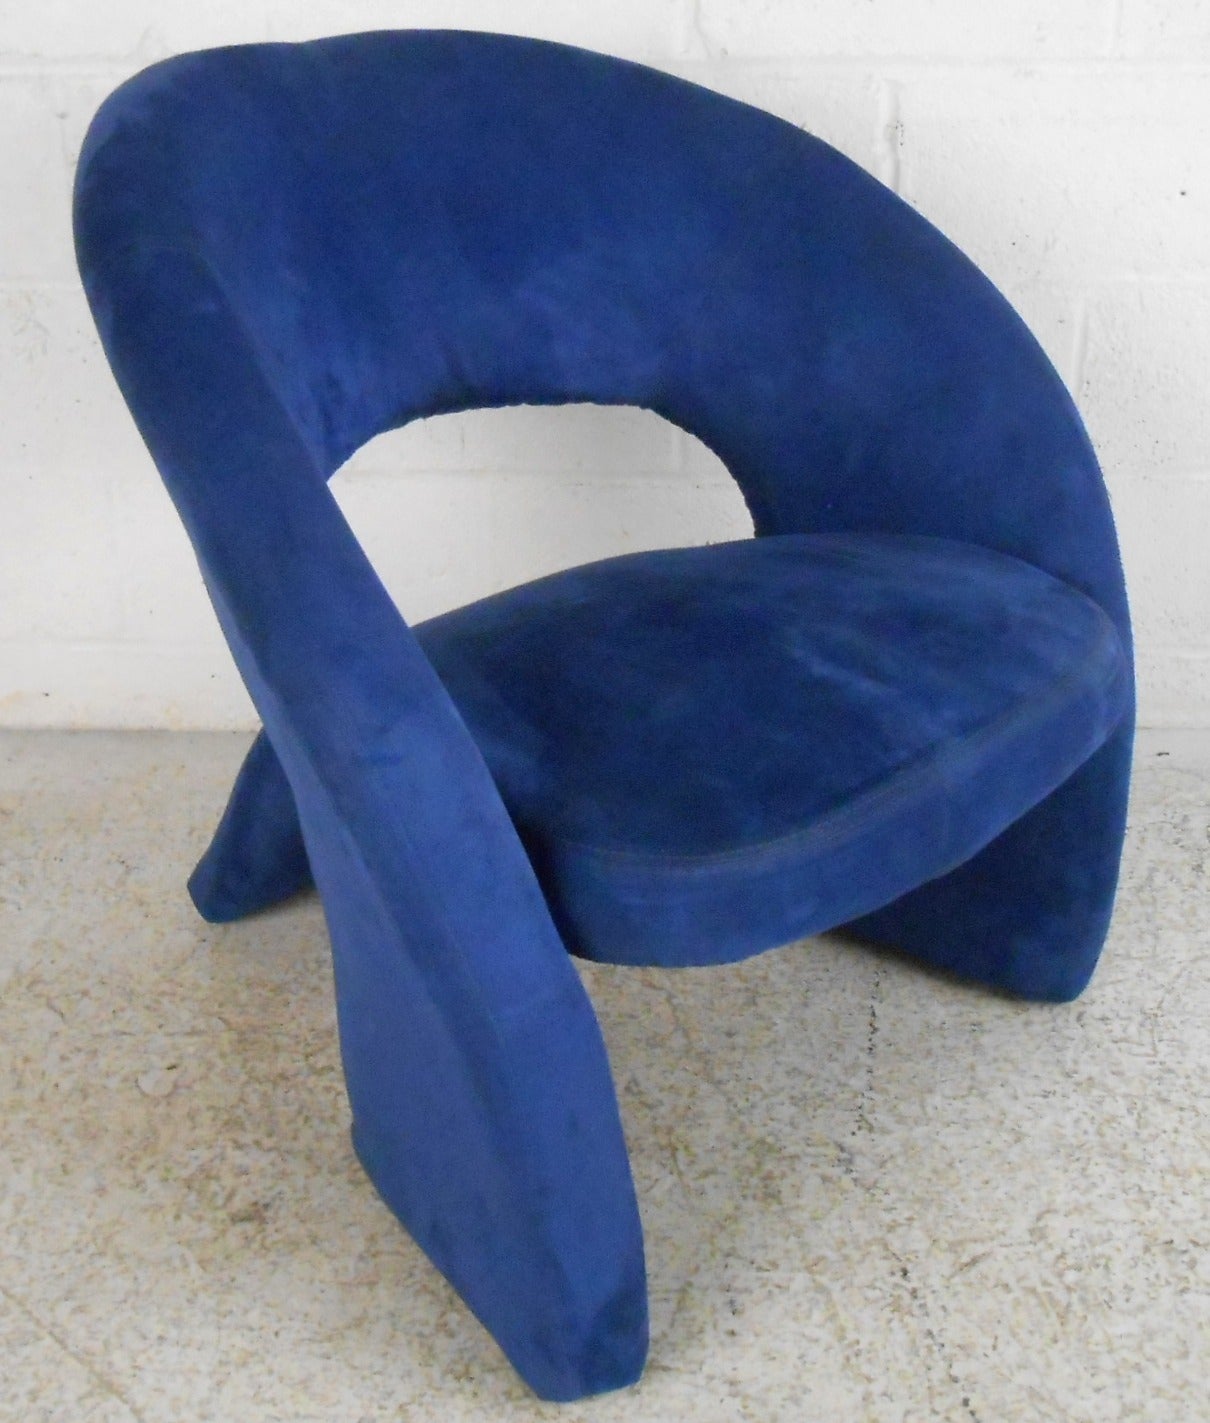 This unique modern chair showcases stylish lines and comfortable seating, making a worthy addition to any home or office. Please confirm item location (NY or NJ).